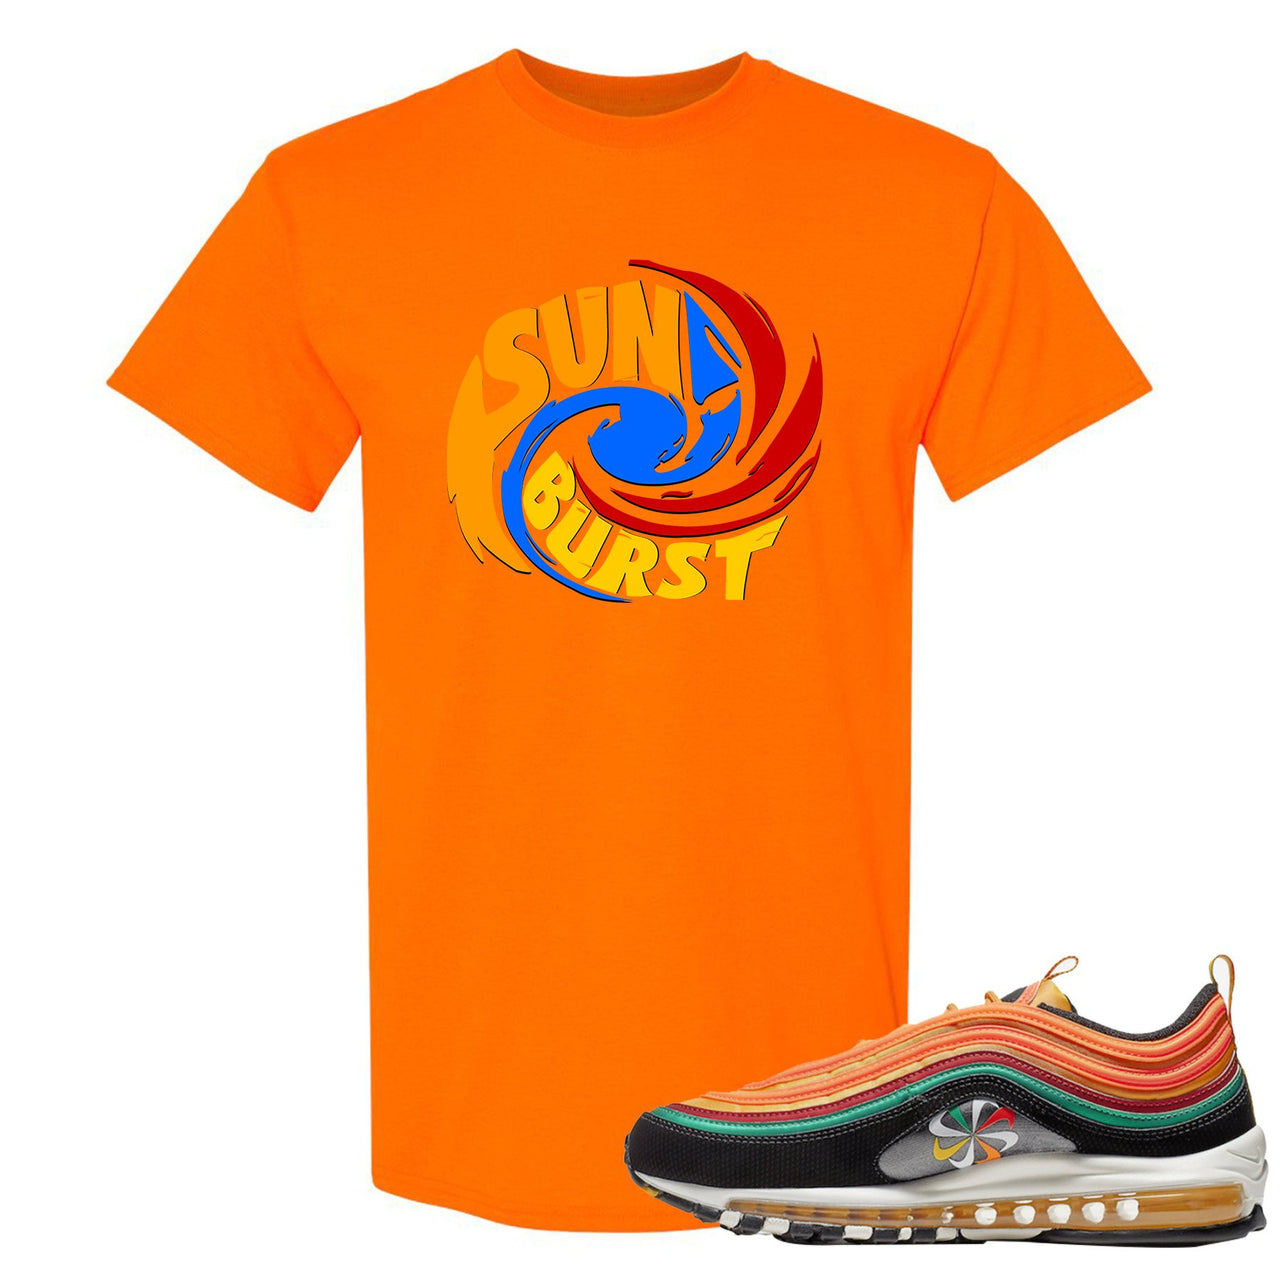 Printed on the front of the Air Max 97 Sunburst safety orange sneaker matching tee shirt is the sunburst hurricane logo